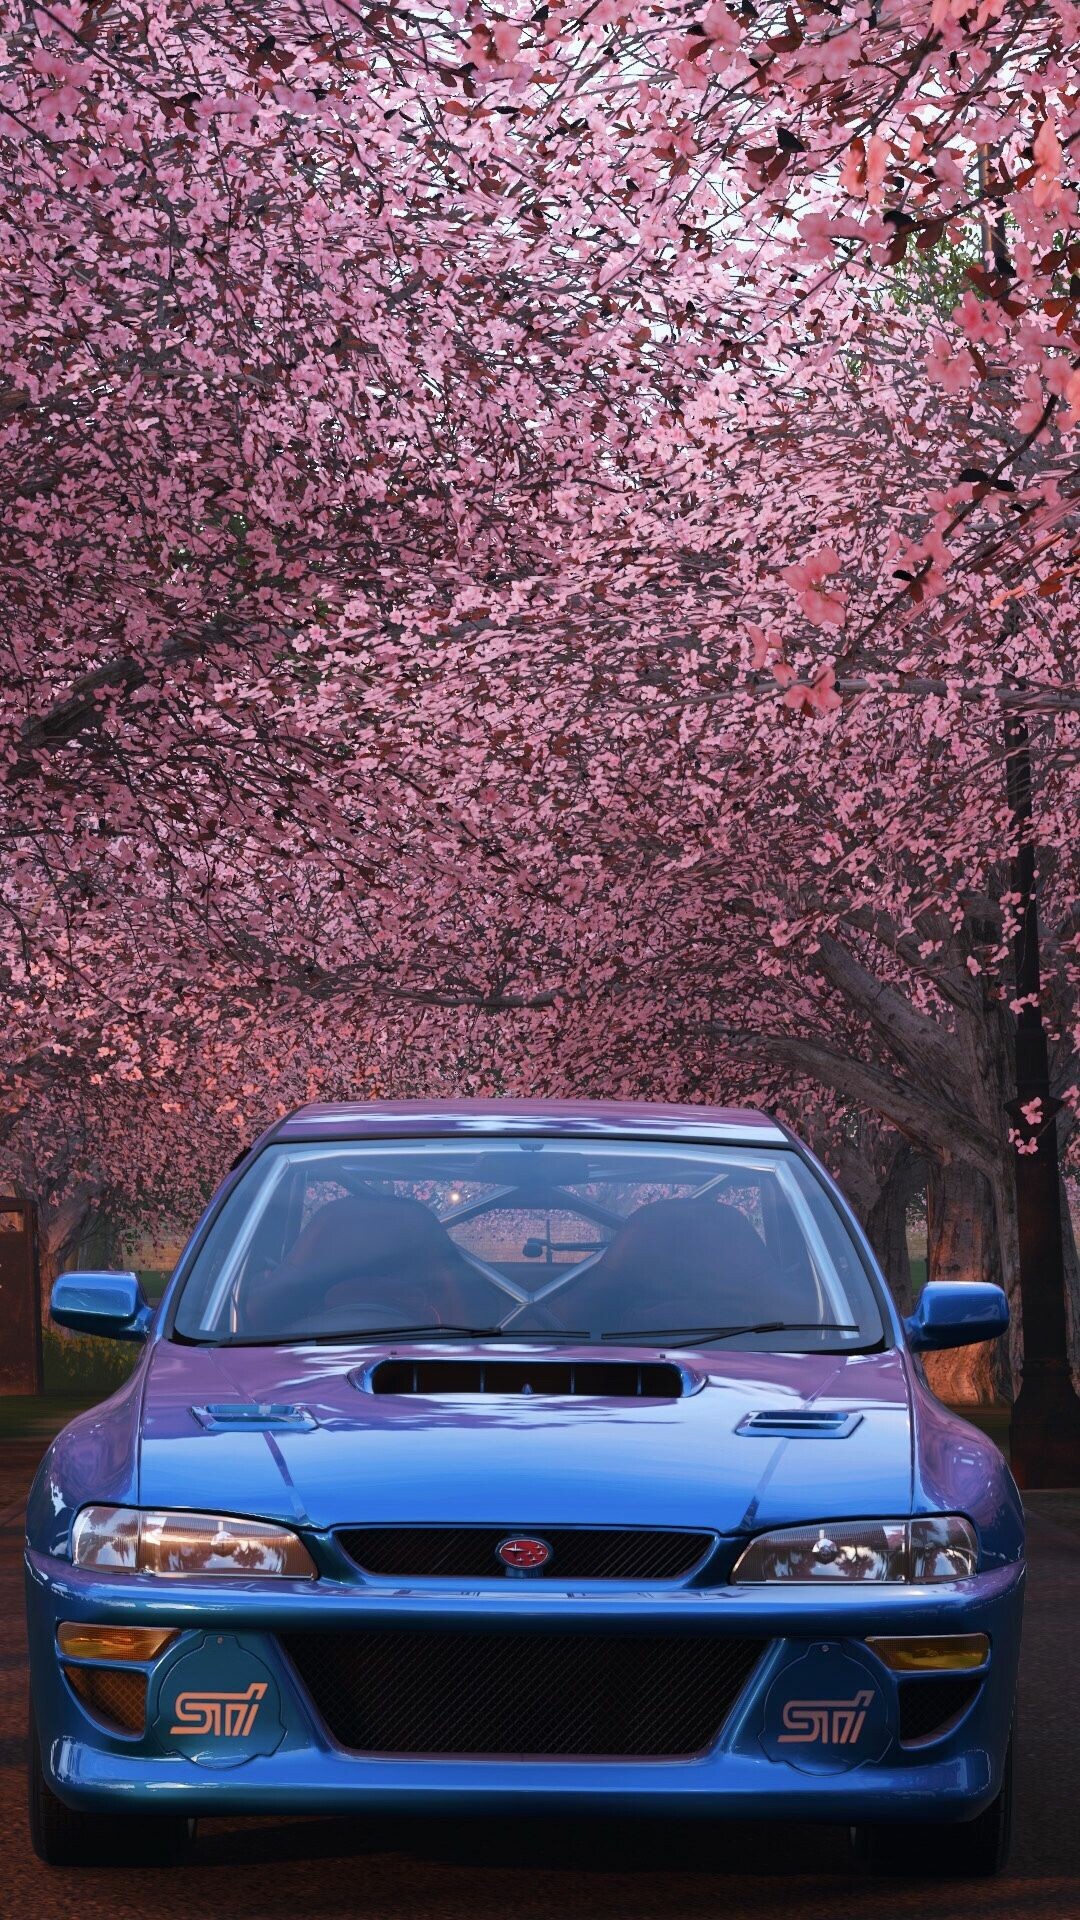 Subaru: 22B, As a road car, it is the ultimate form of a late 90s Impreza celebrated in all shapes and sizes. 1080x1920 Full HD Background.